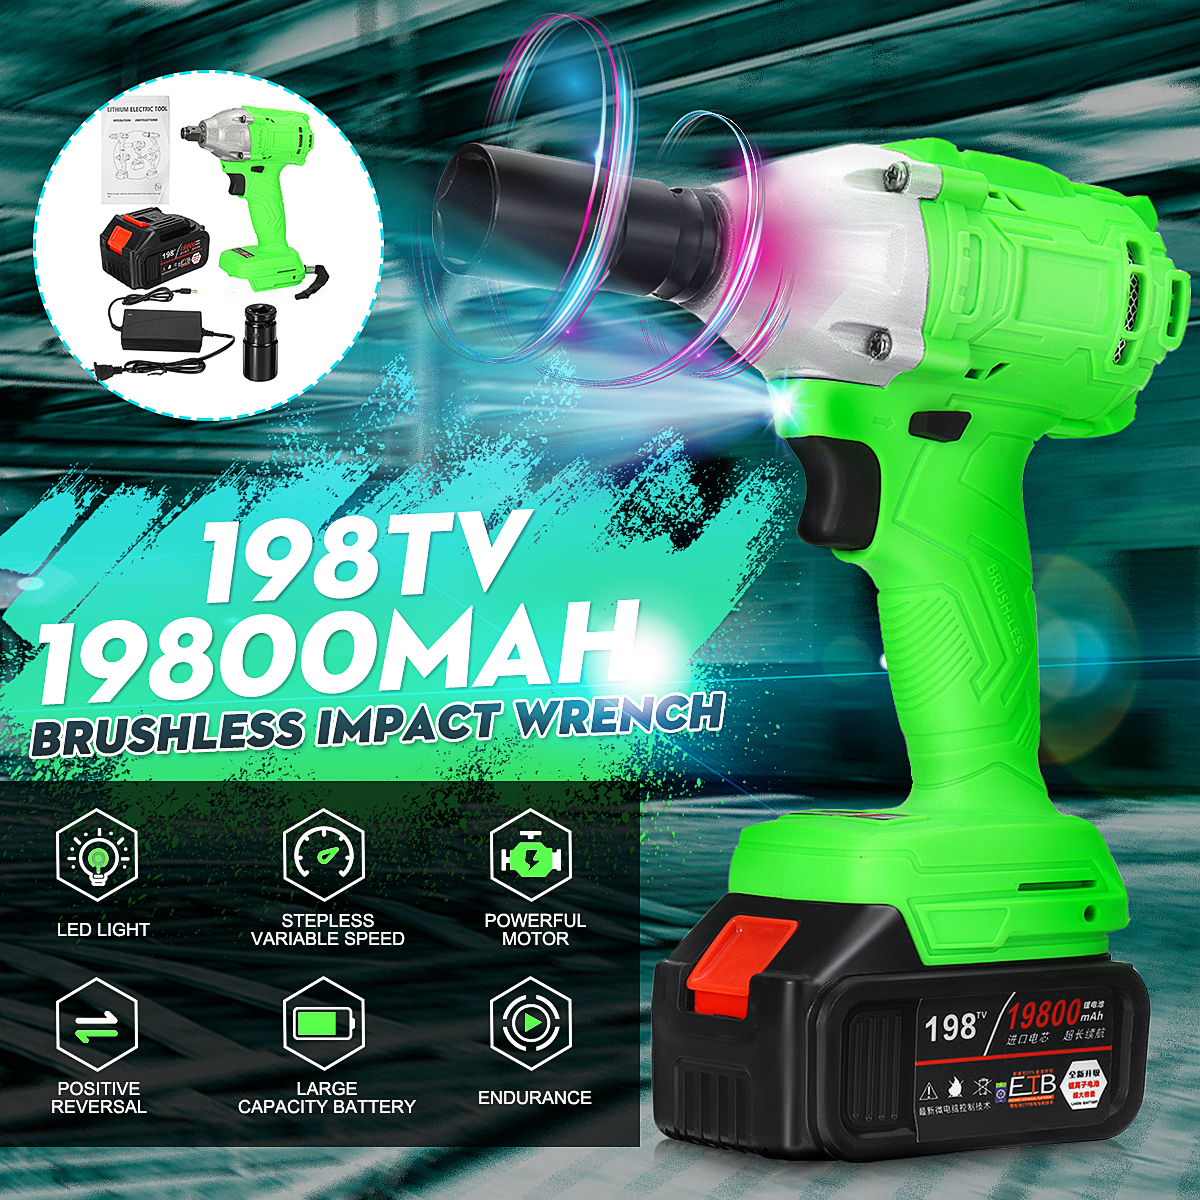 12-520Nm-19800mAh-Electric-Cordless-Impact-Wrench-Brushless-Battery--Case-1676852-3